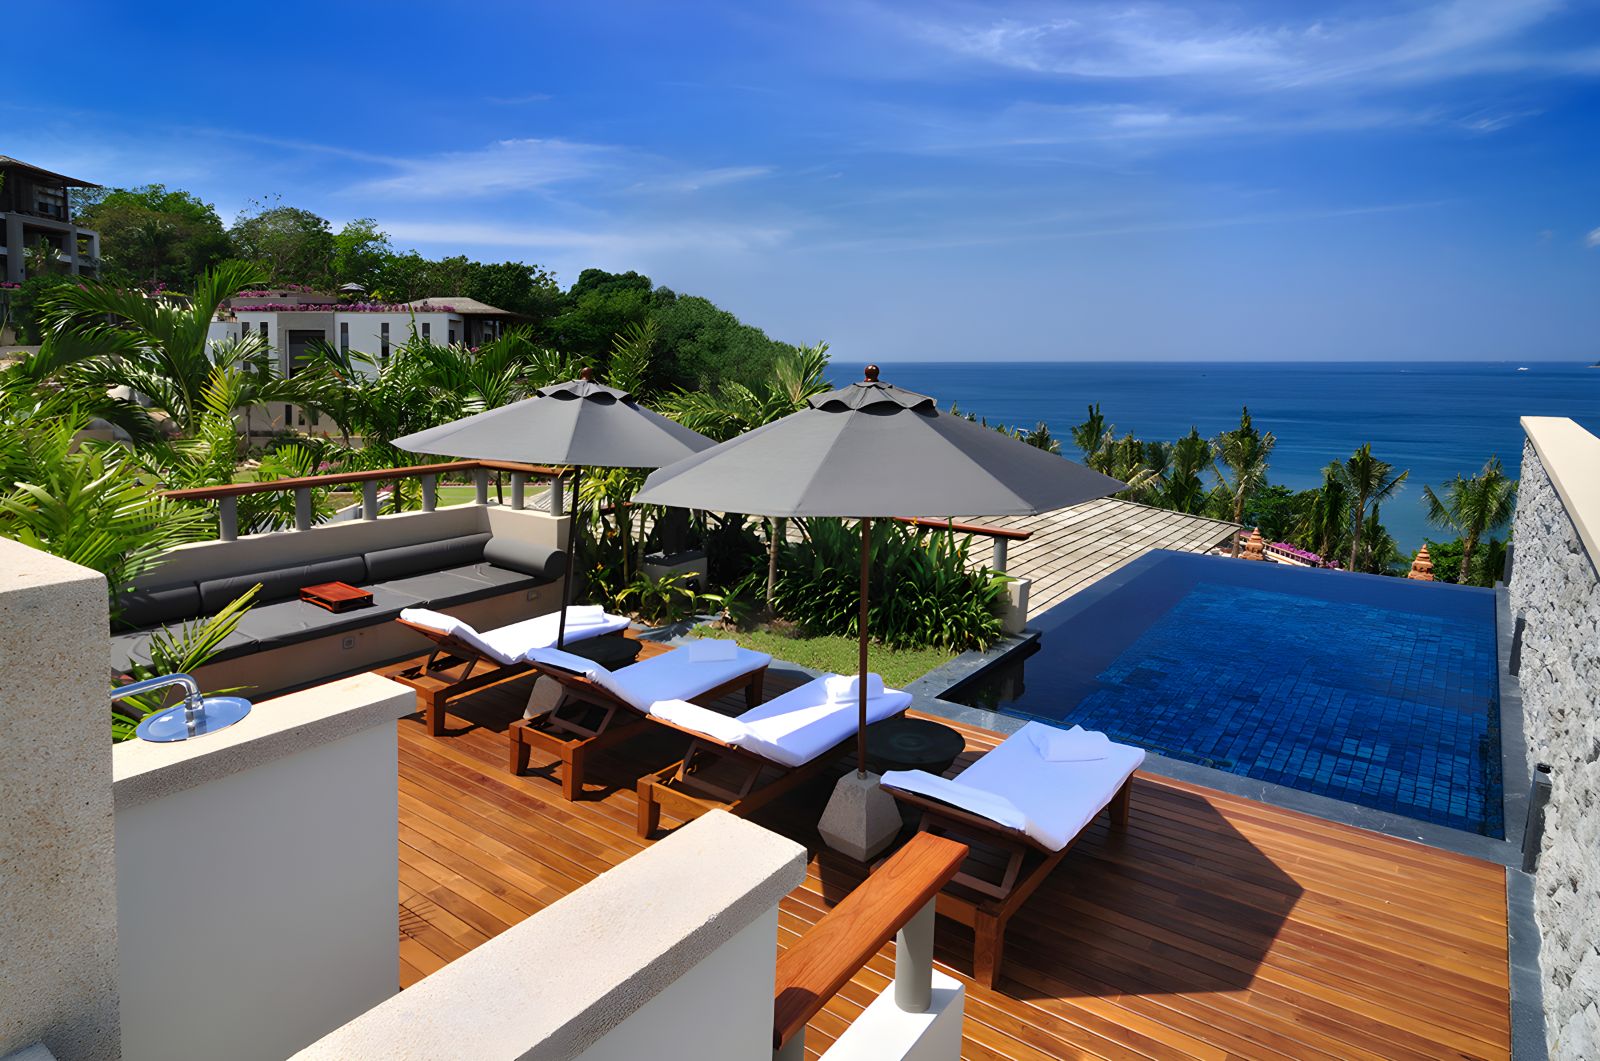 Sunbeds and rooftop pool at Andara Resort & Villas in the Phuket region of Thailand